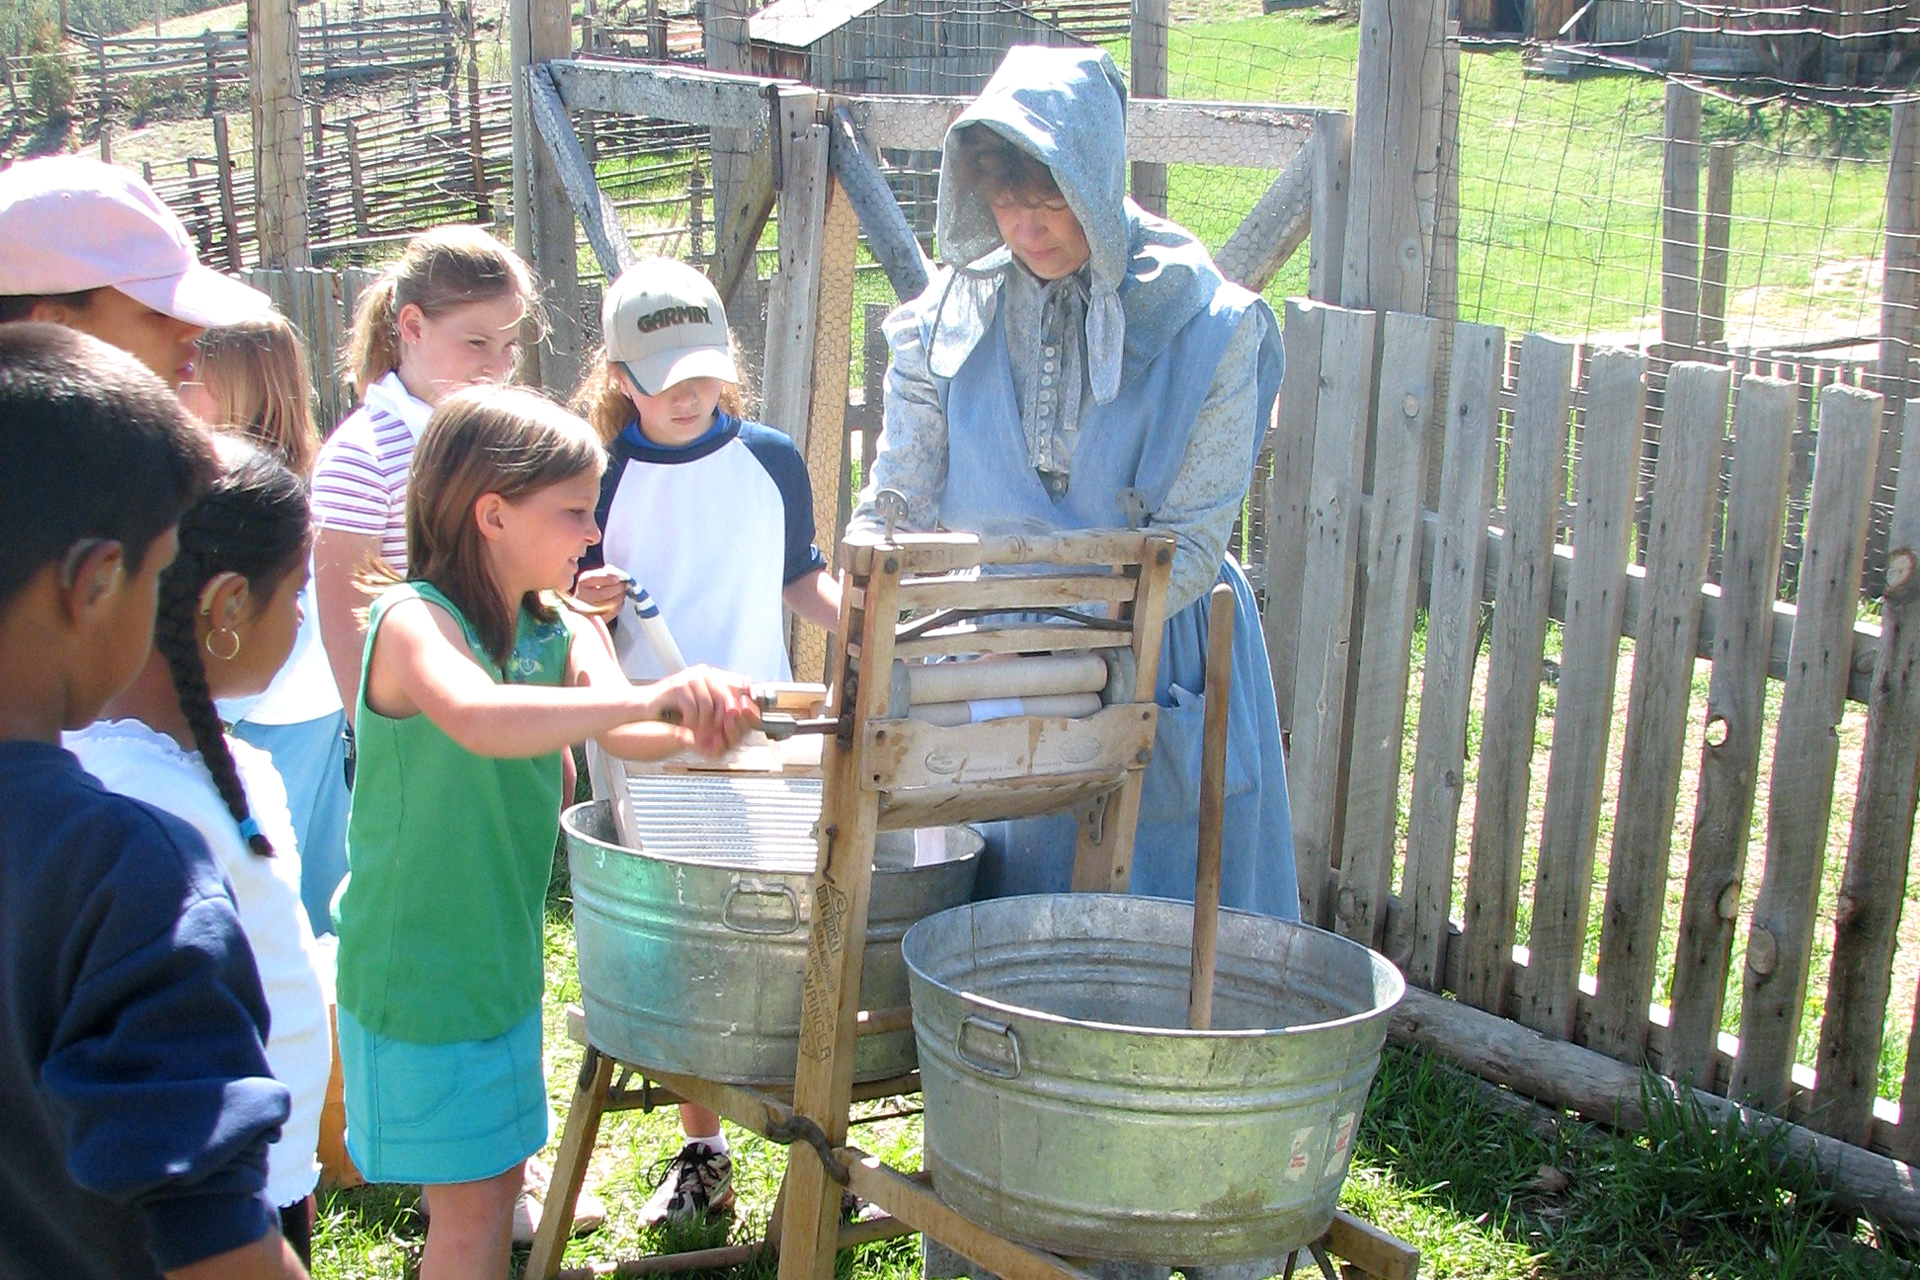 A group of children perform laundry using old-fashioned tools